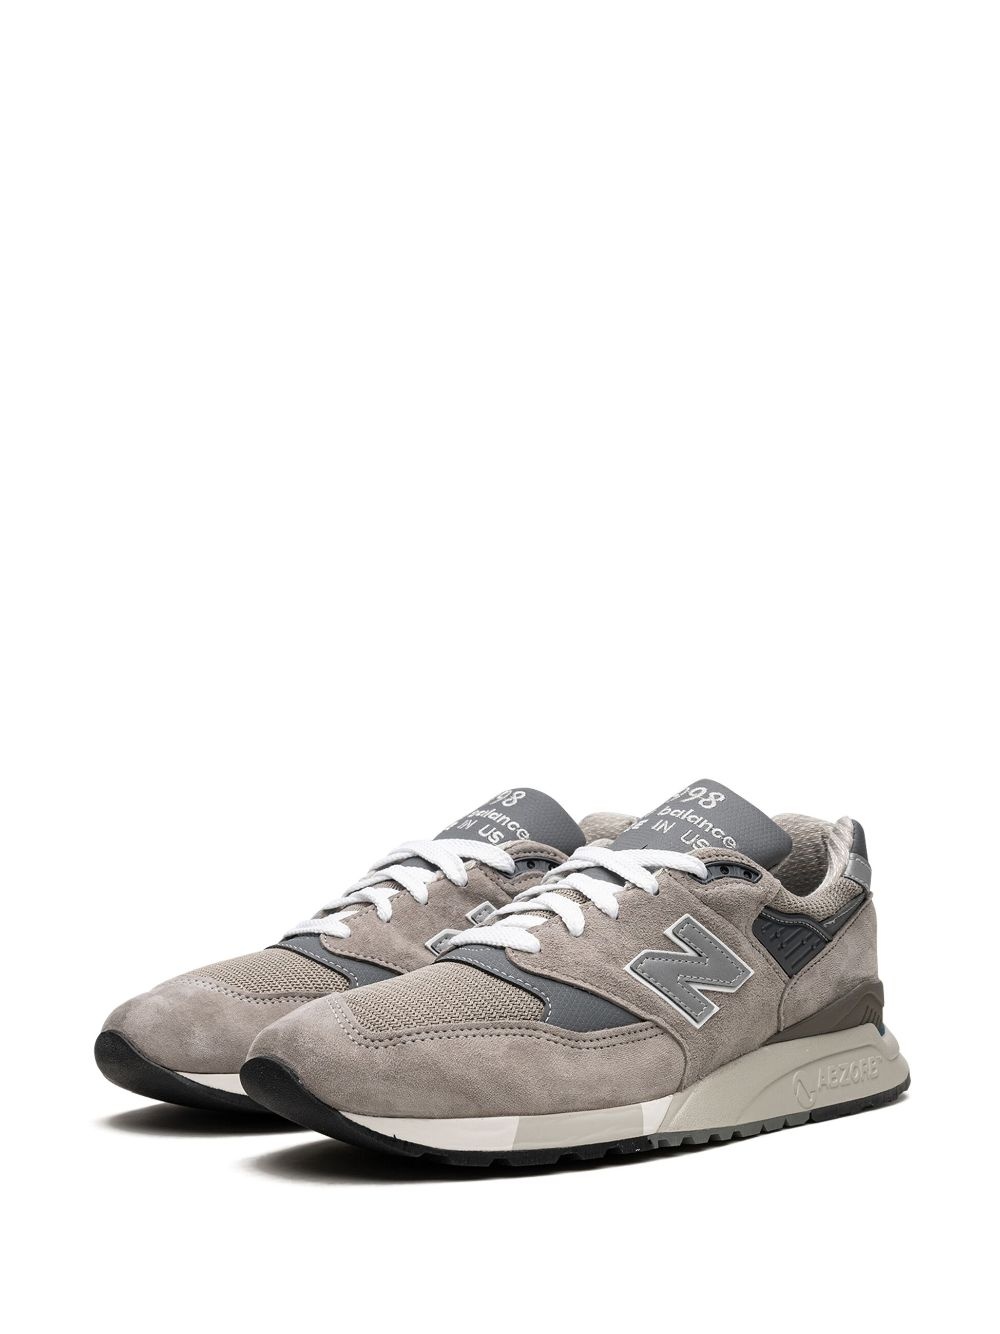 998 "Made in USA - Grey/Silver" sneakers - 5